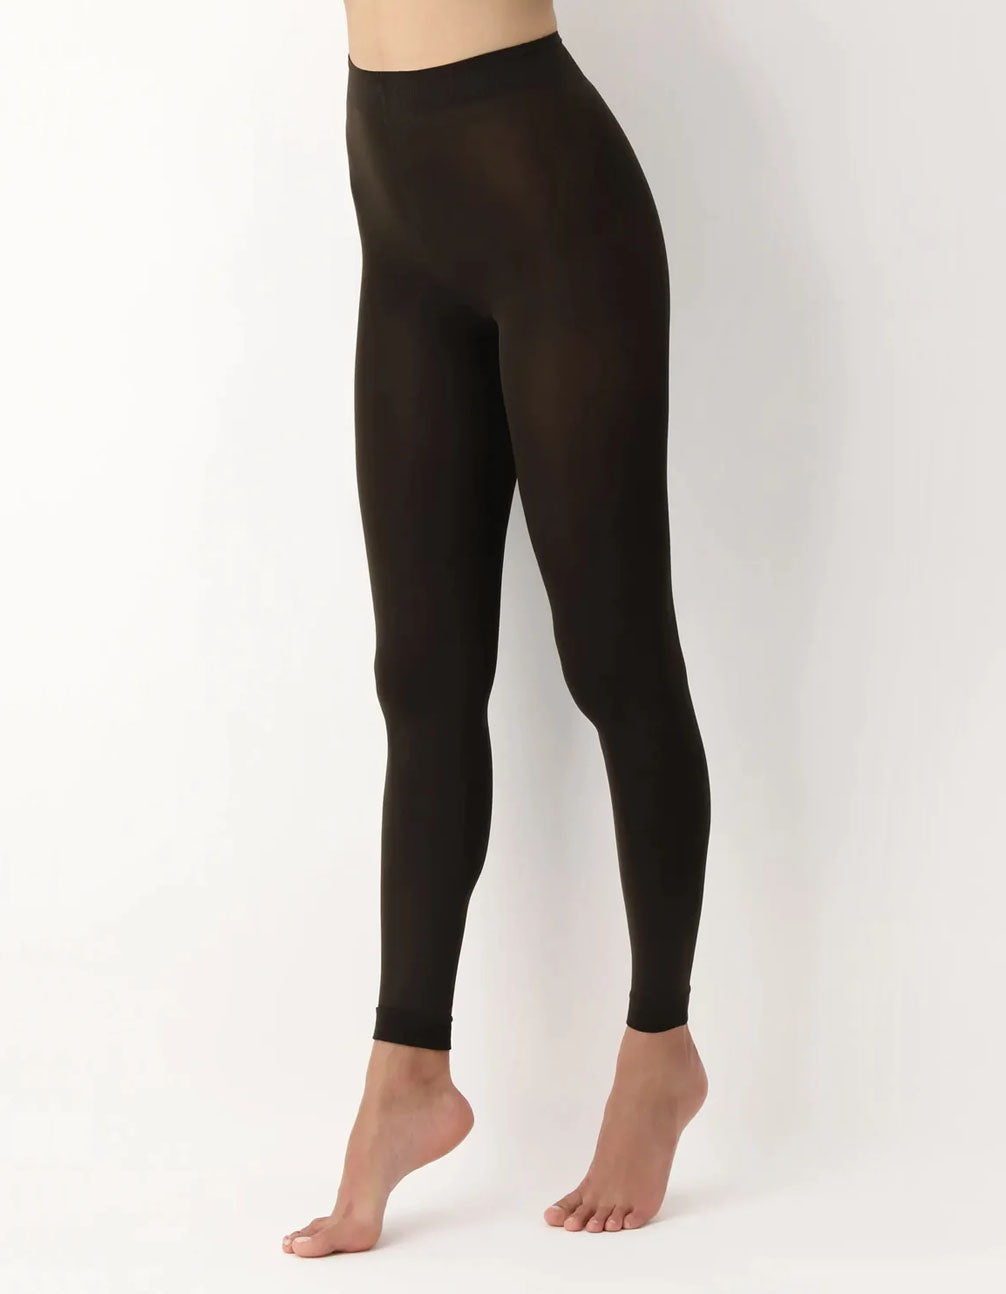 Oroblù All Colors 120 Leggings - Dark brown ultra opaque soft matte footless tights with flat seams, gusset and deep waist band.